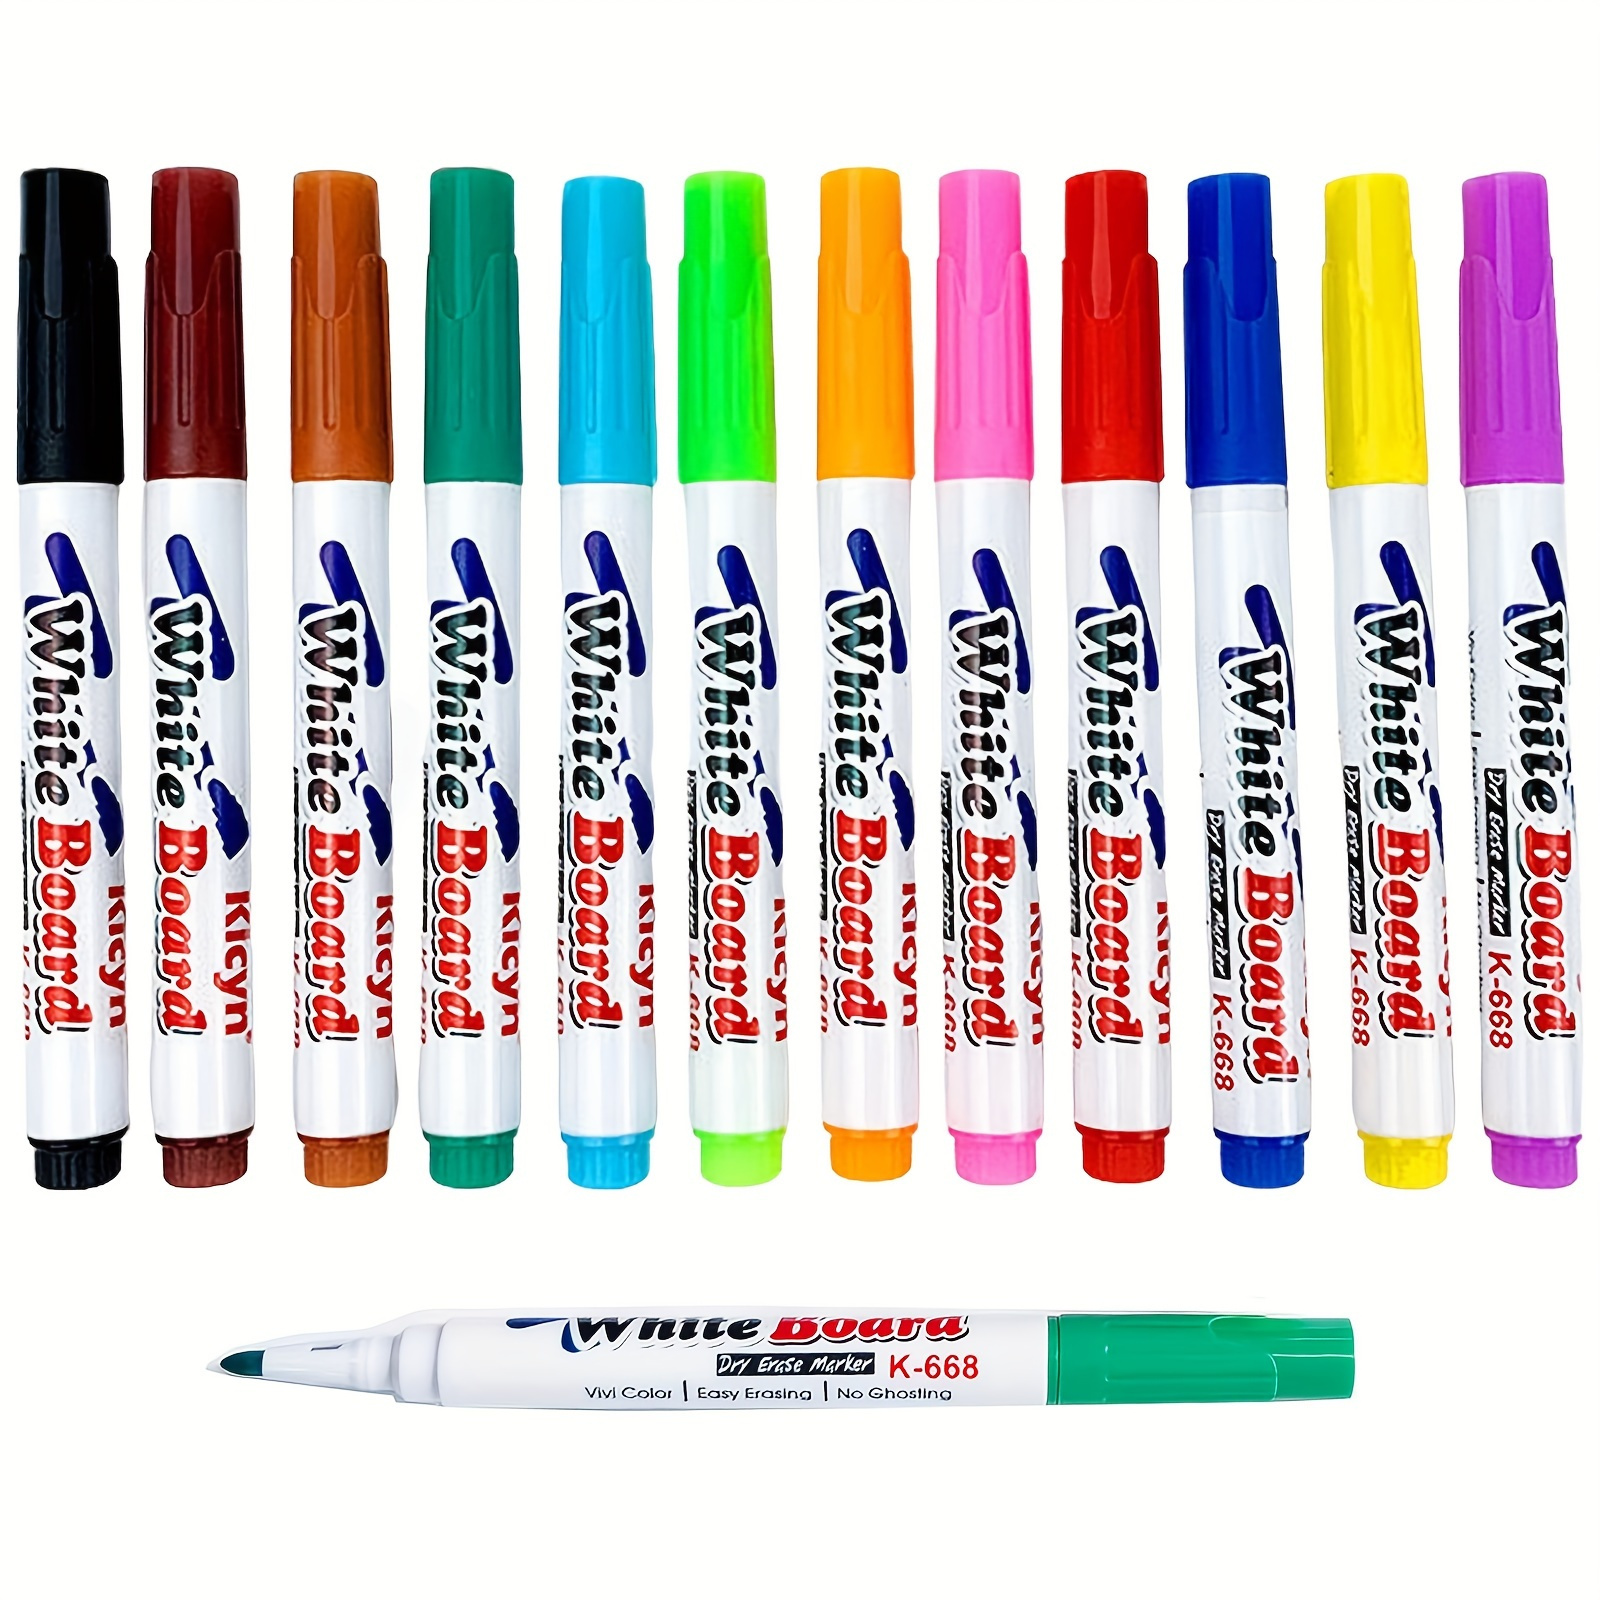 10Pcs Dry Erase Markers Ultra Fine Tip,0.5mm 3Colors Erasable Whiteboard  Markers for Kids,School,Office,Whiteboard Accessories